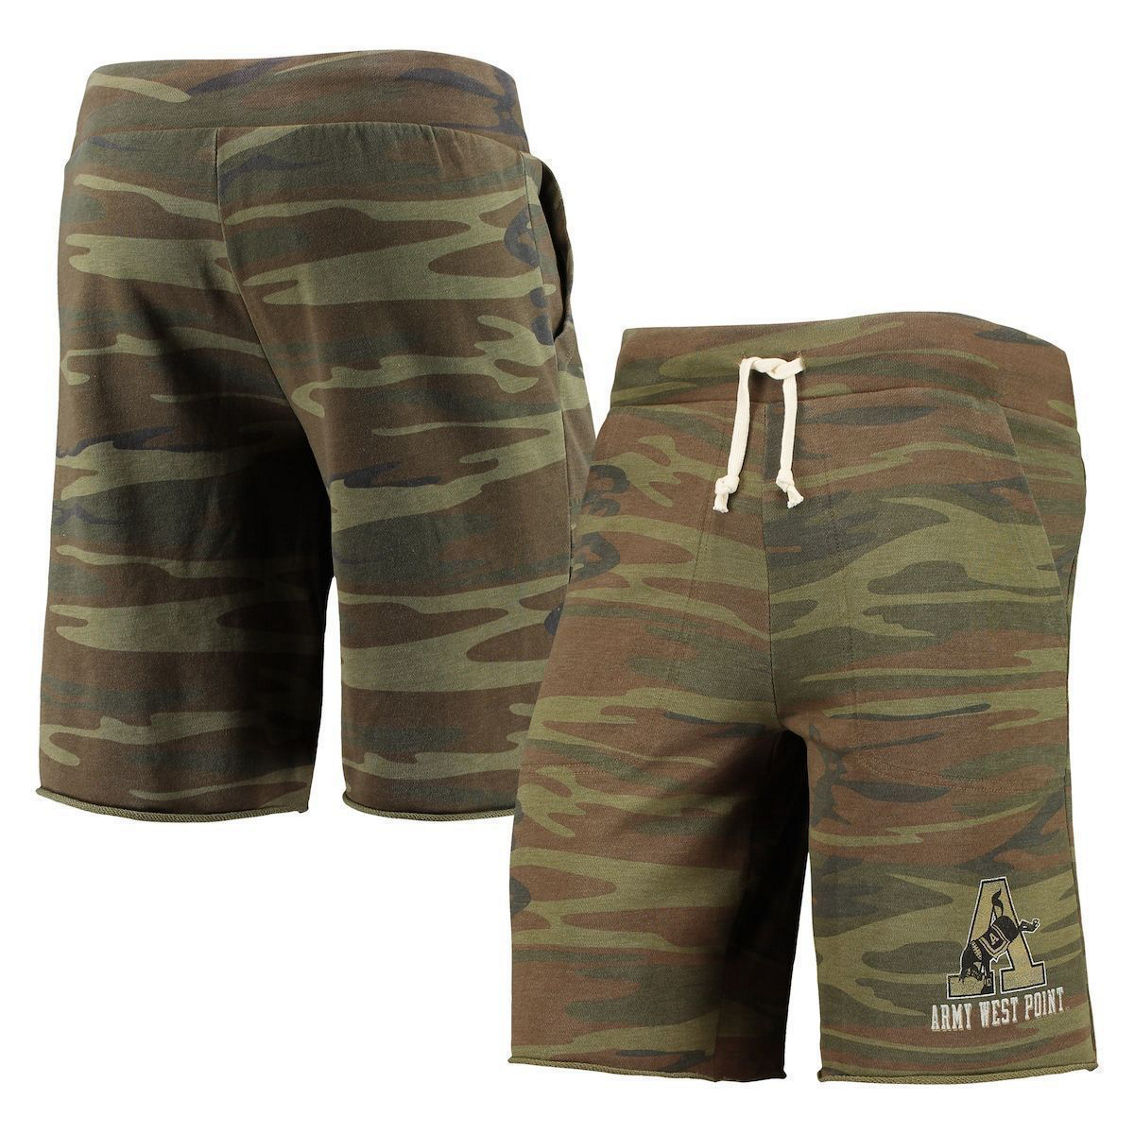 Alternative Apparel Men's Camo Army Black Knights Victory Lounge Shorts - Image 2 of 4